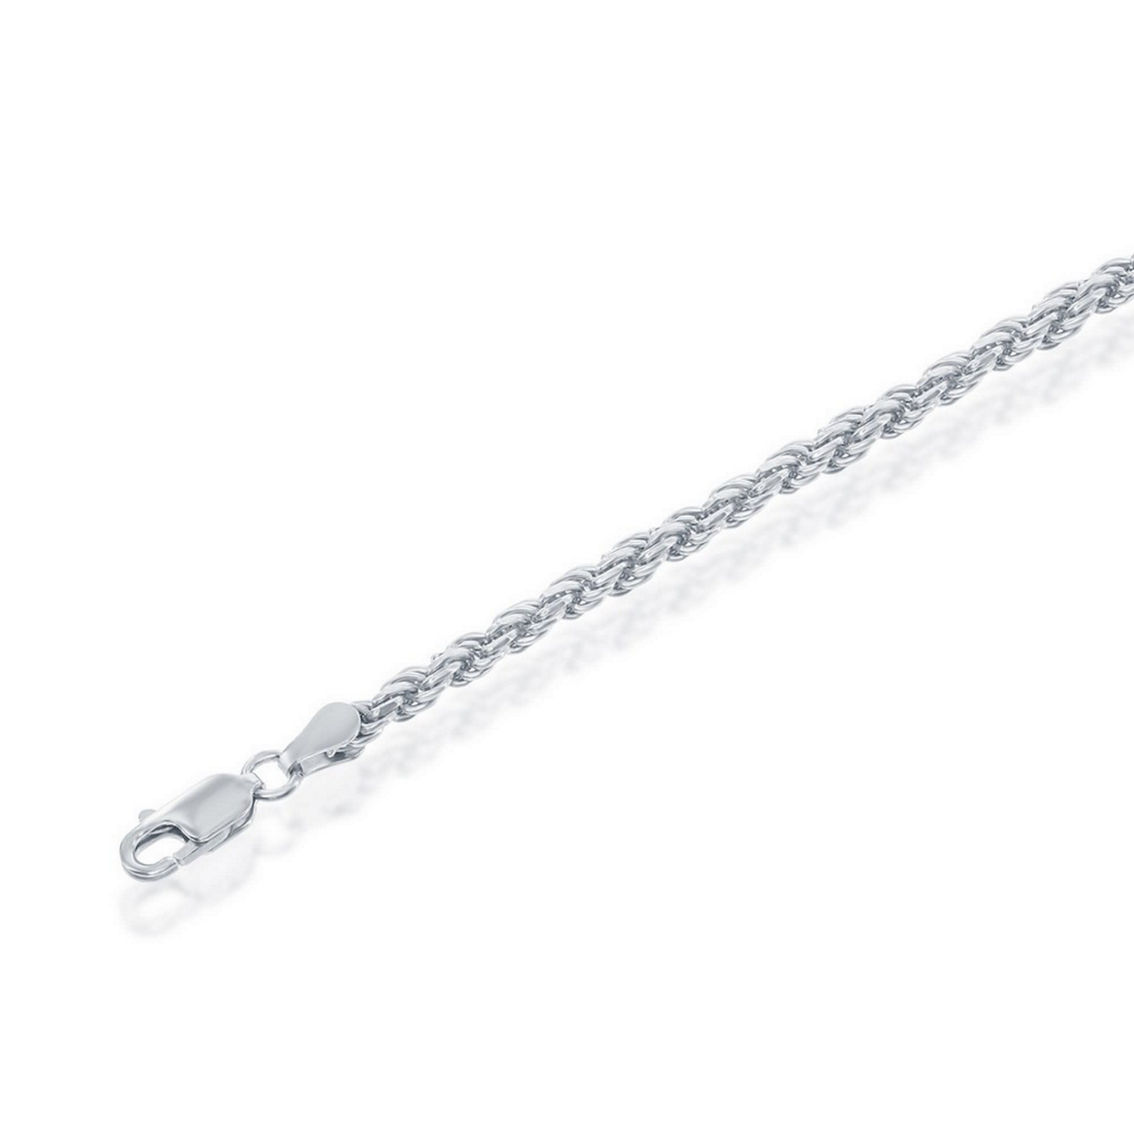 Links of Italy Sterling Silver Solid Diamond-Cut 3mm Rope Chain - Rhodium Plated - Image 2 of 3